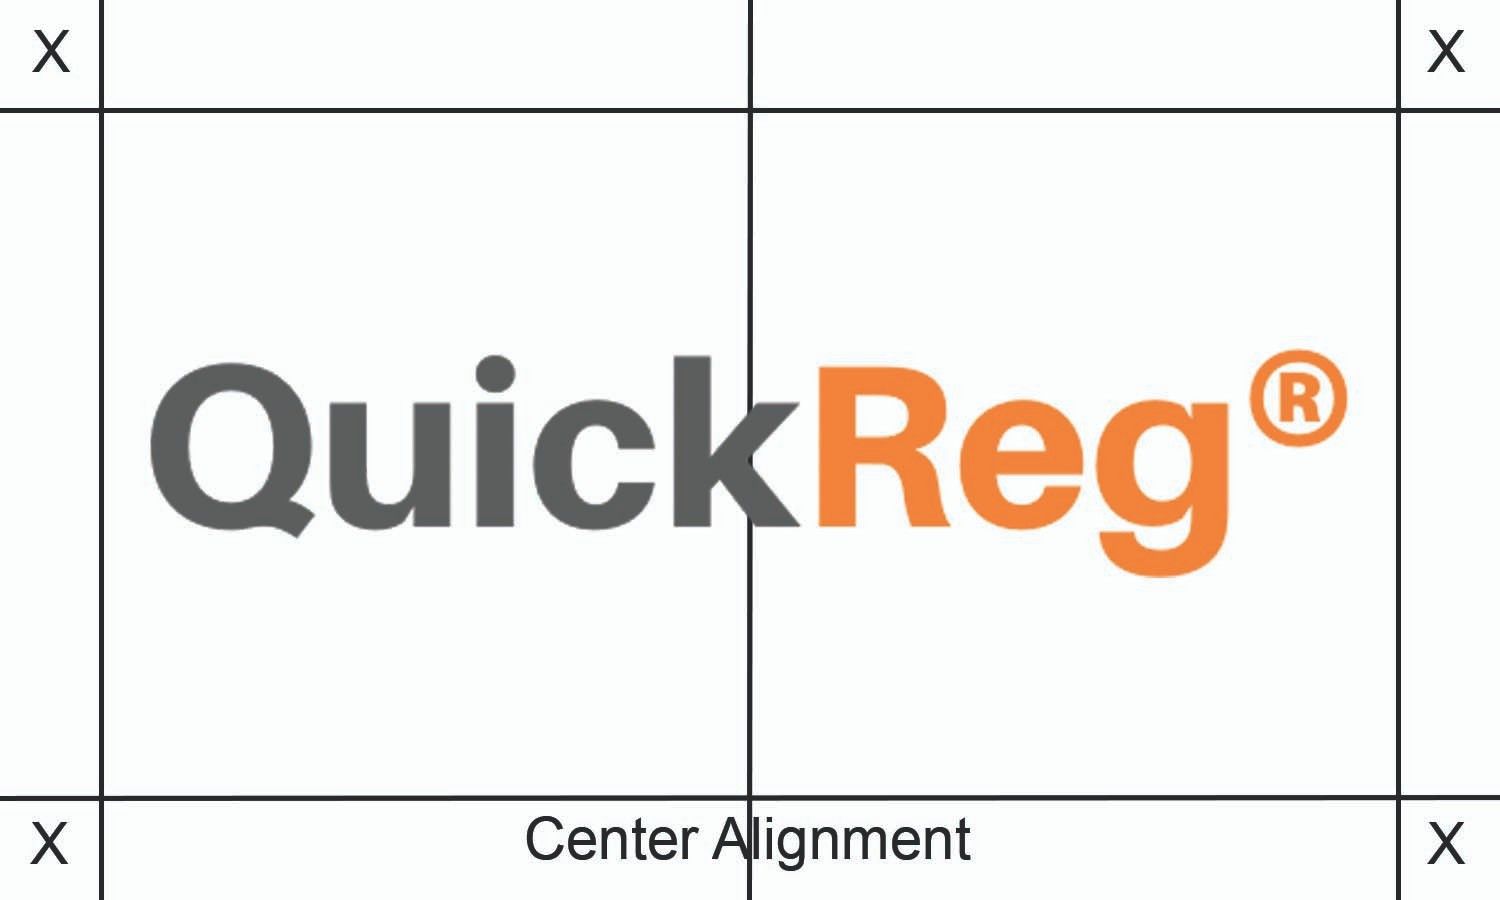 The full-color version of the QuickReg logo with guidelines showing the desiredspacing between the logo and other element